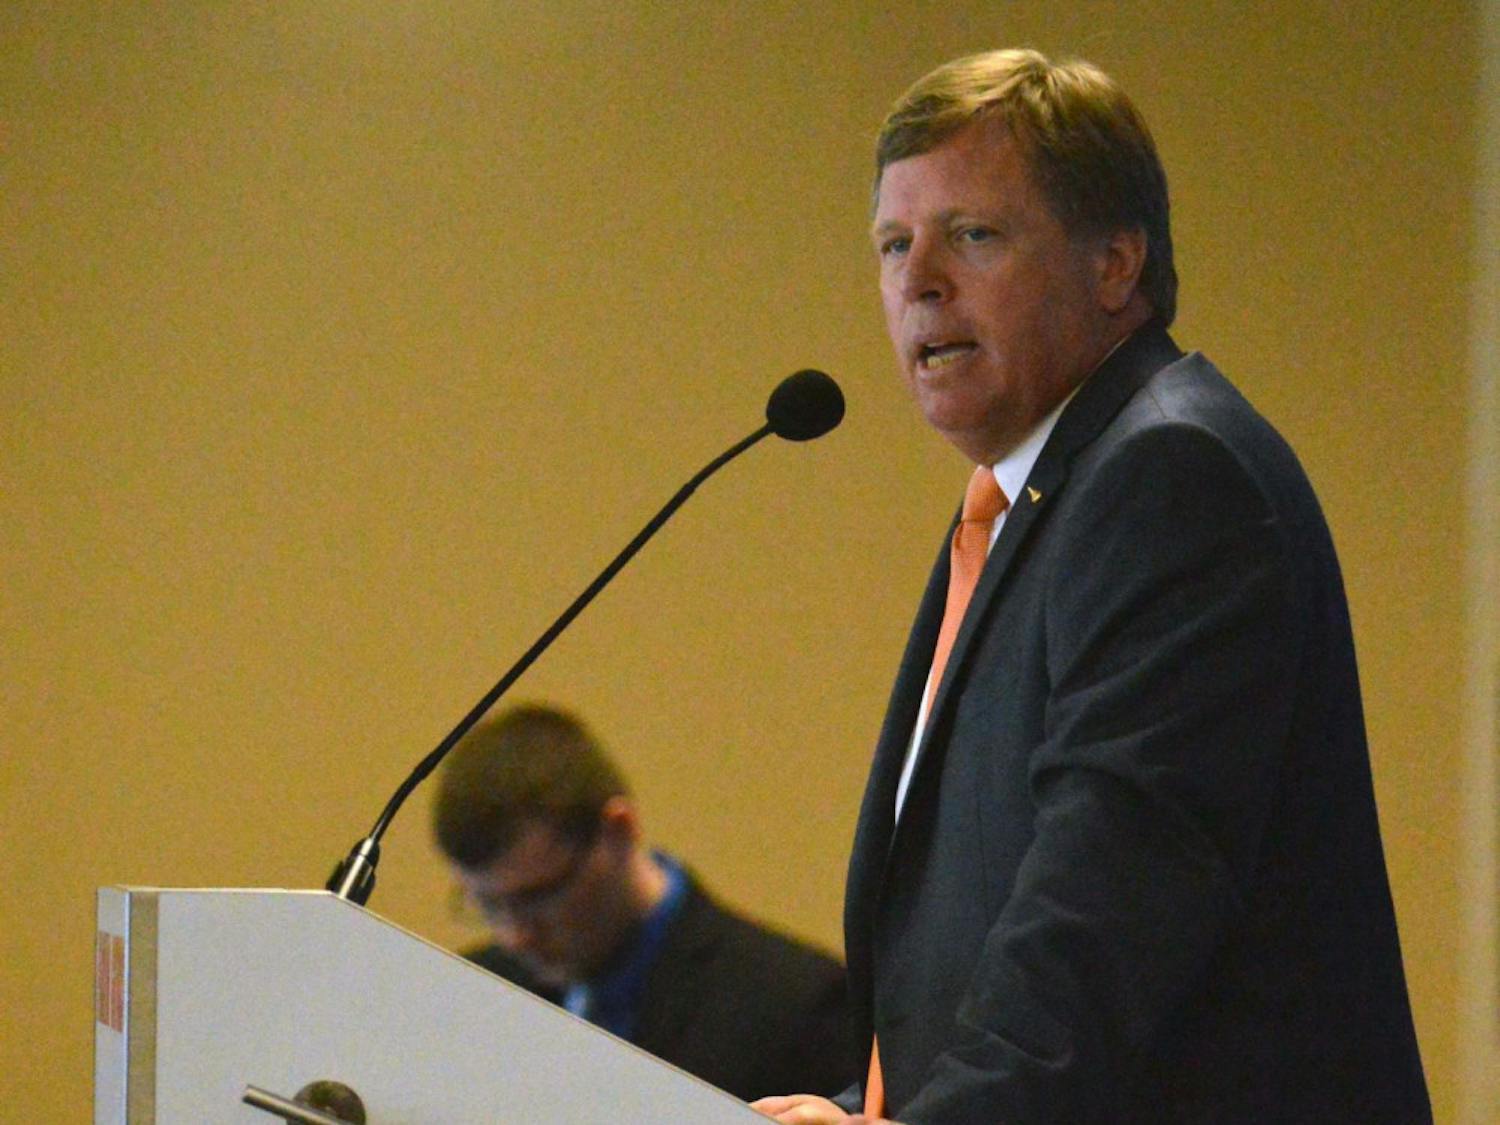 New head football coach Jim McElwain speaks at his opening press conference on Saturday in Ben Hill Griffin Stadium.